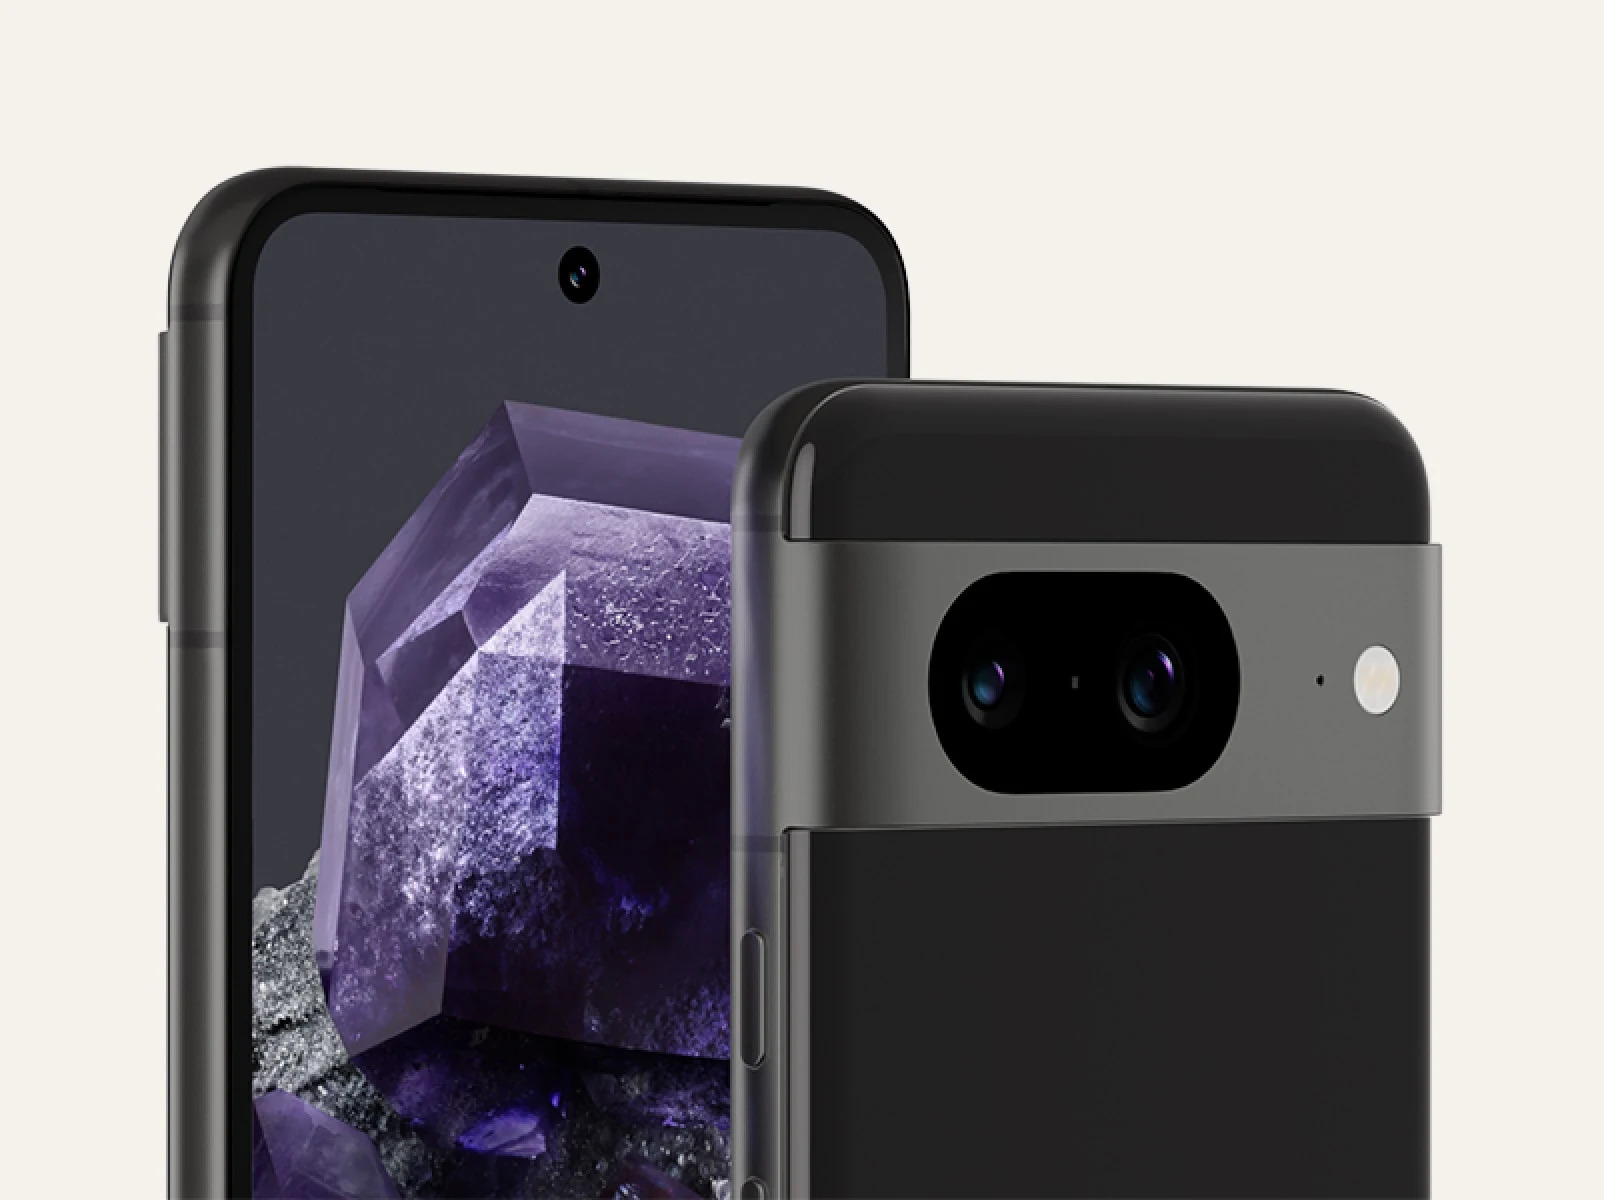 The front and back of Pixel 8 in Obsidian color. The back shows off its matte back glass, while the front shows off its brilliant display.